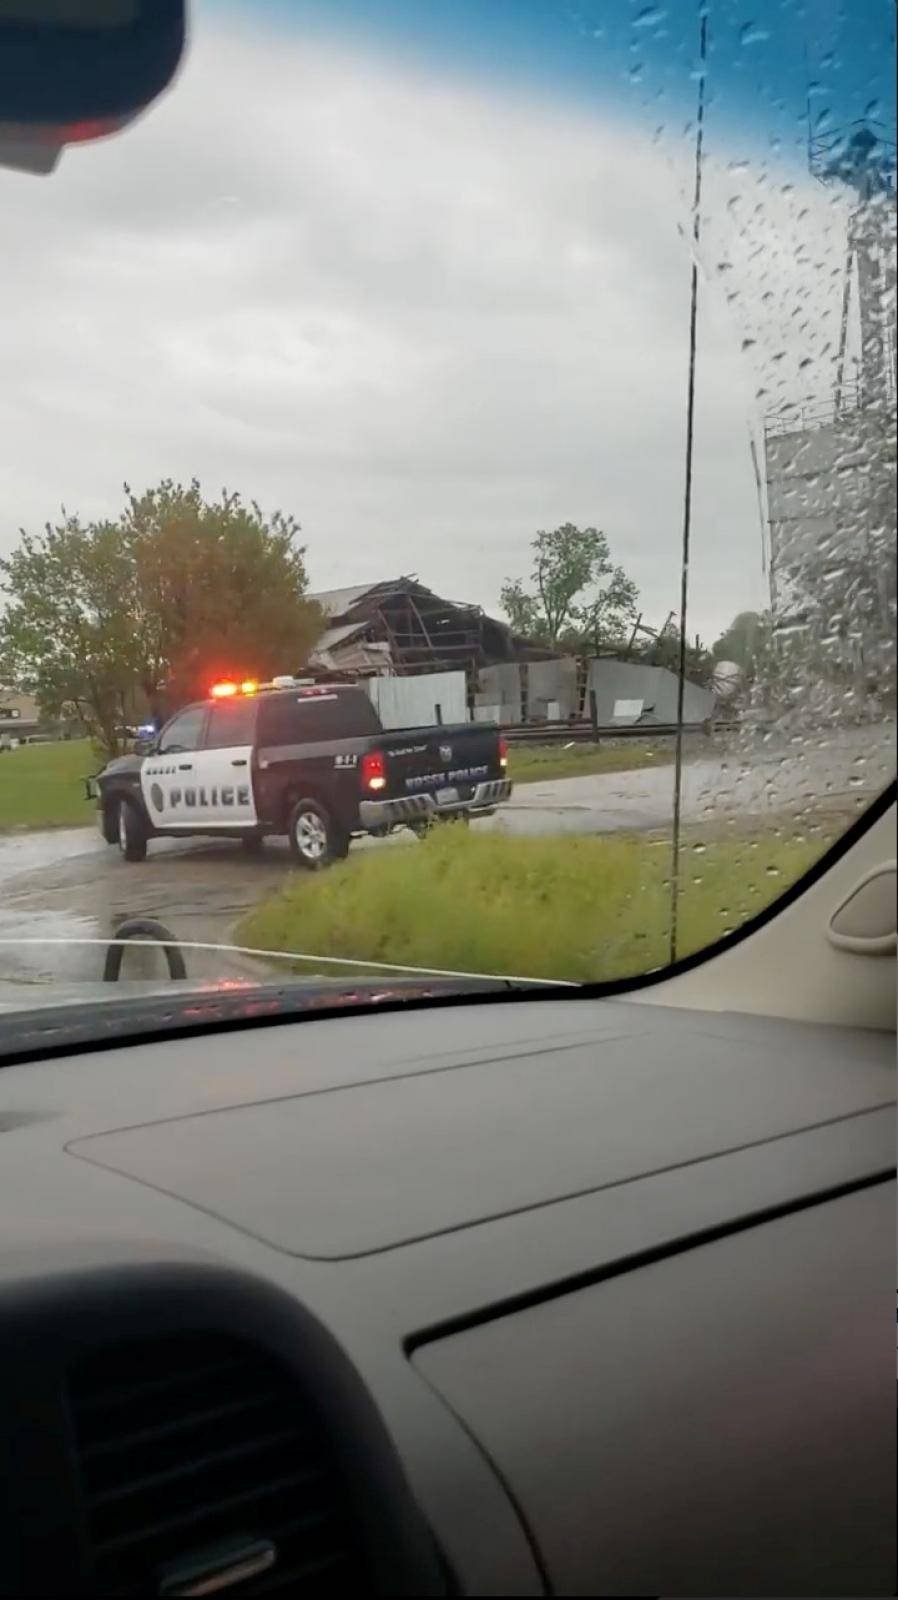 Police vehicle seen next to a damaged property in the aftermath of a tornado in Franklin, Texas, U.S., in this still image from social media video